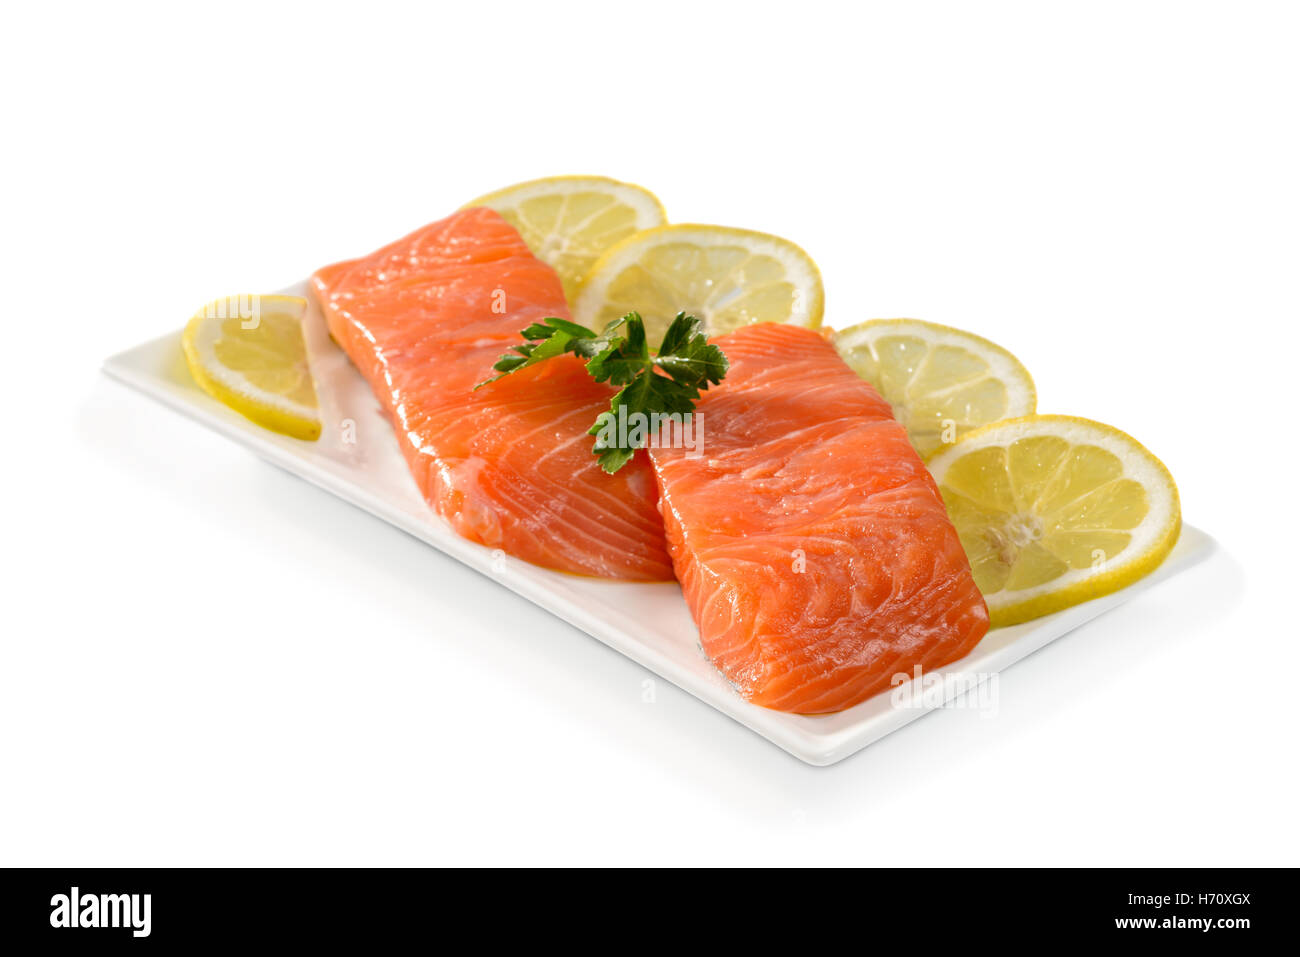 Salmon fillets with lemon slices on a white background Stock Photo